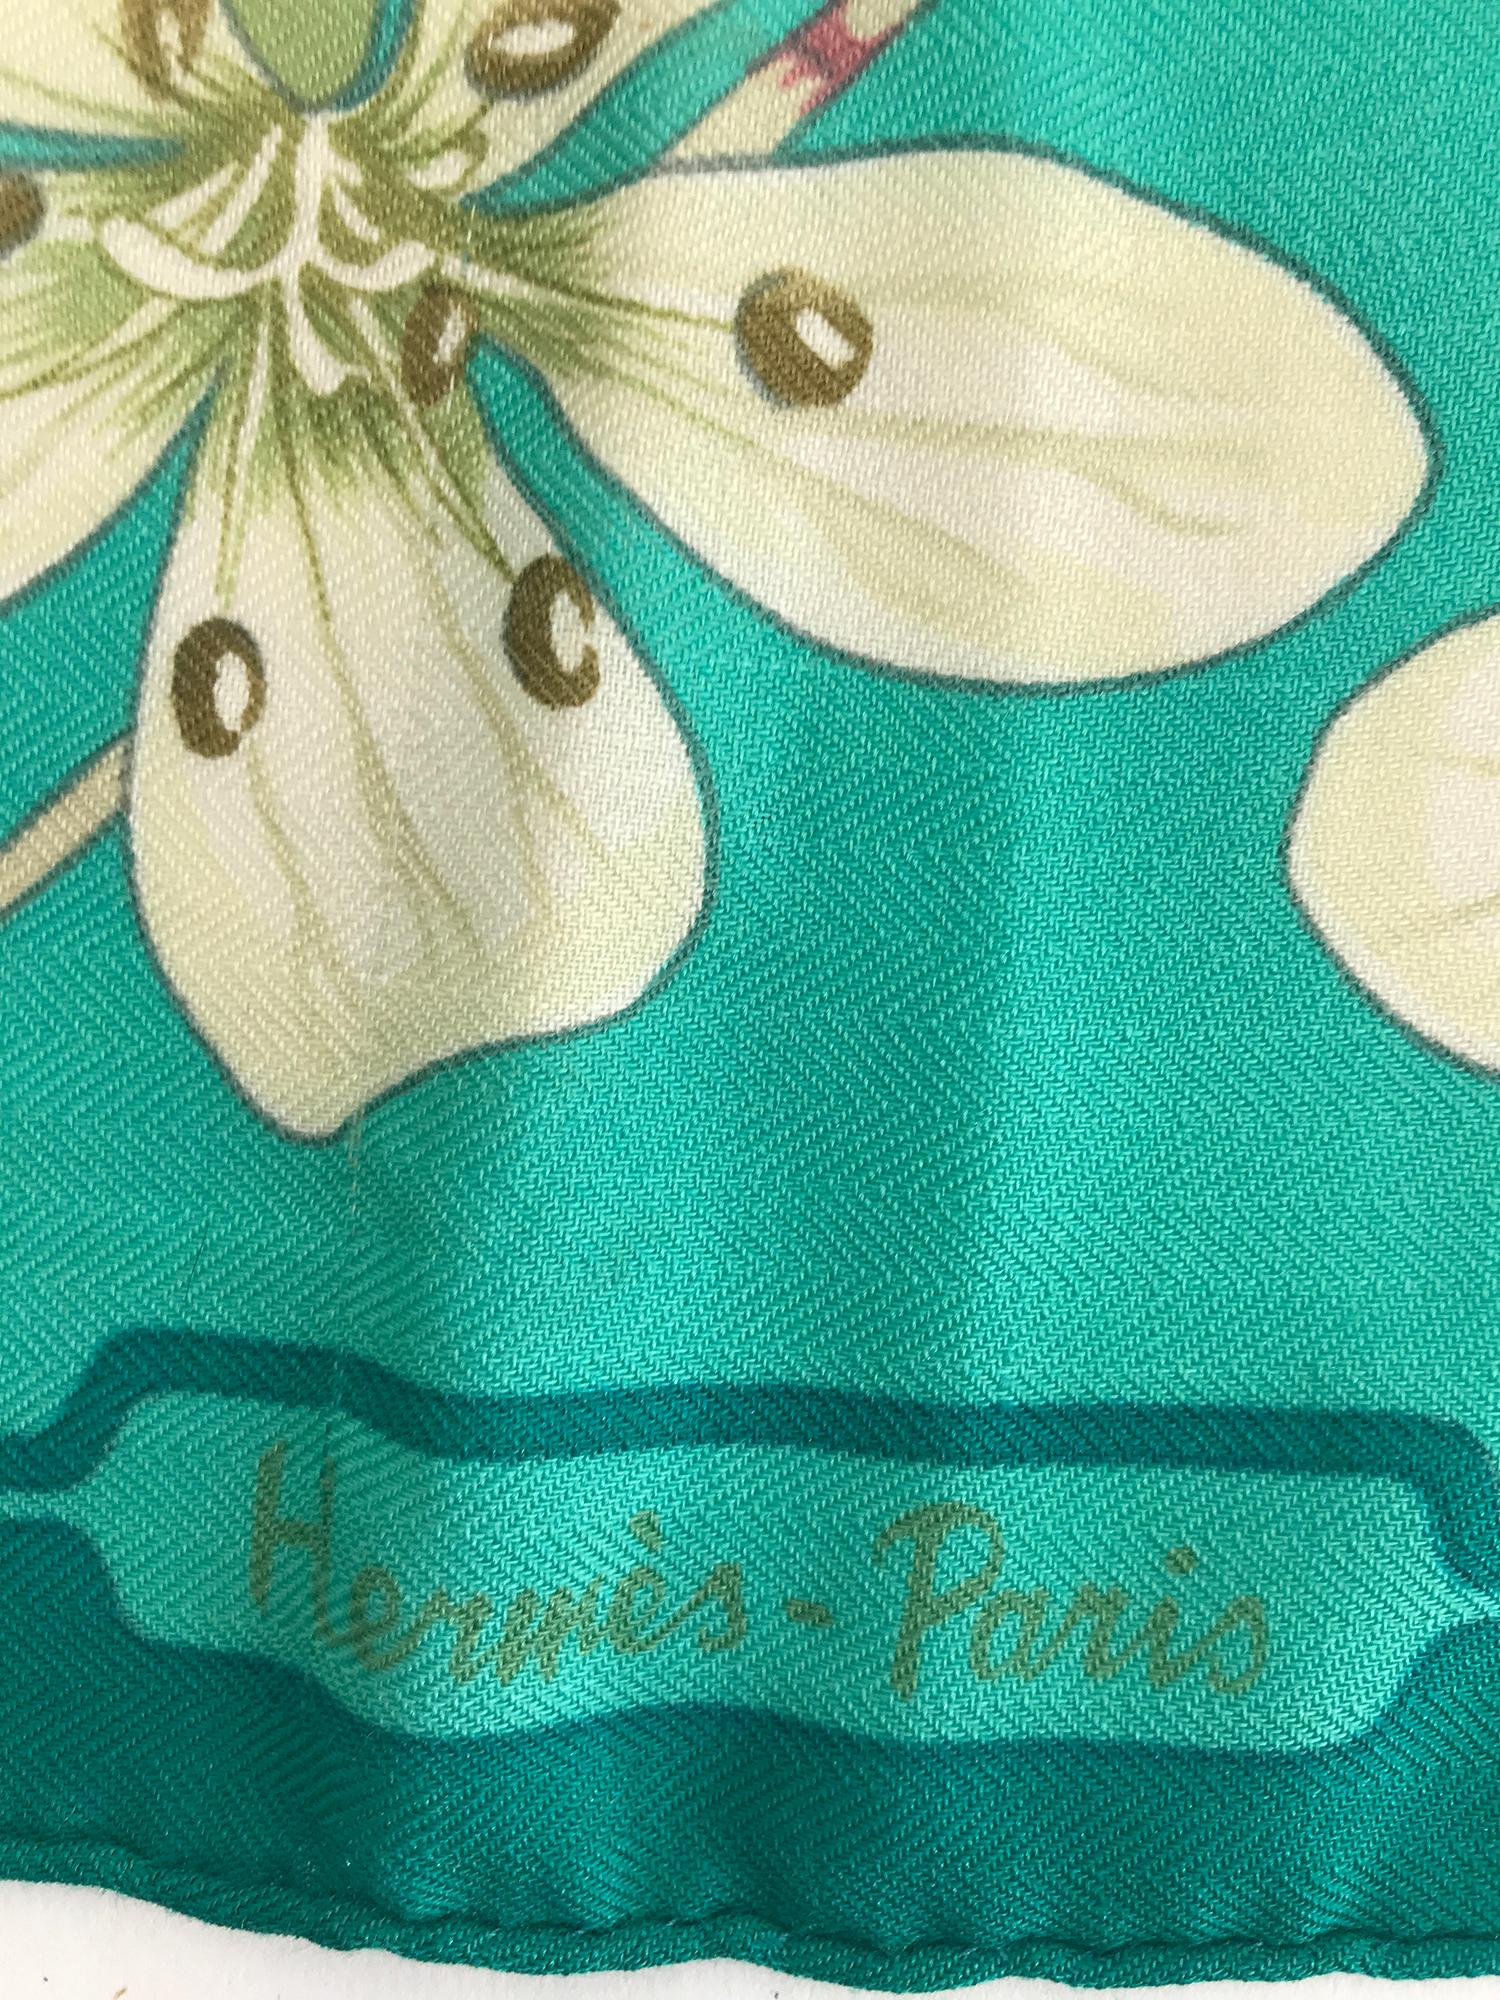 Hermes Flora Graeca cashmere twill scarf designed by Niki Goulandris 90cm. A beautiful scarf in shades of turquoise with with a center of fantasy flowers twining on vines. There is a pull, see photo of Hermes signature and two very tiny pulls along